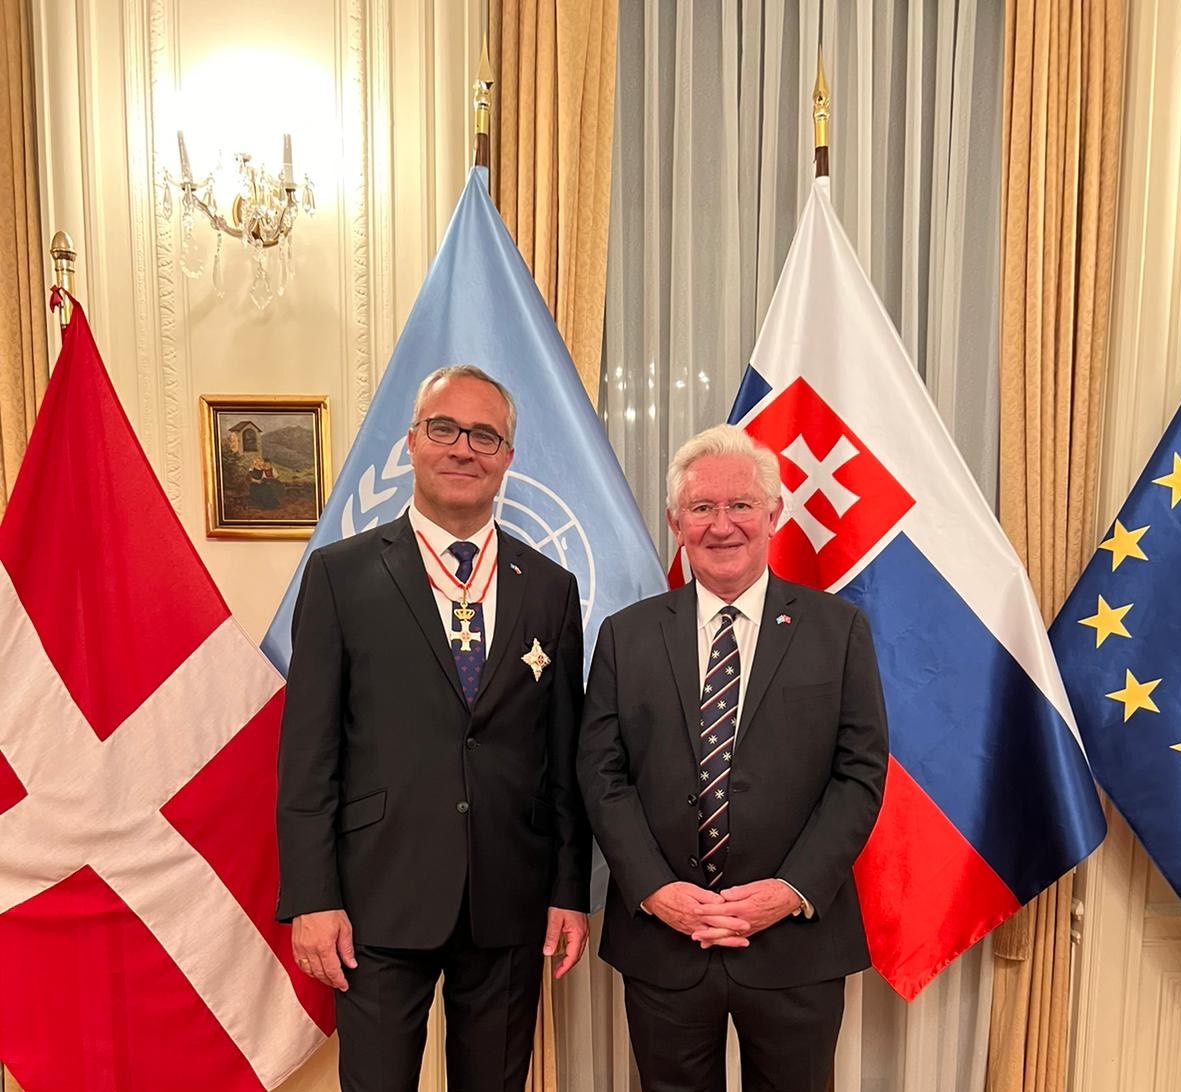 H.E. Michal Mlynár Honored by the Sovereign Order of Malta